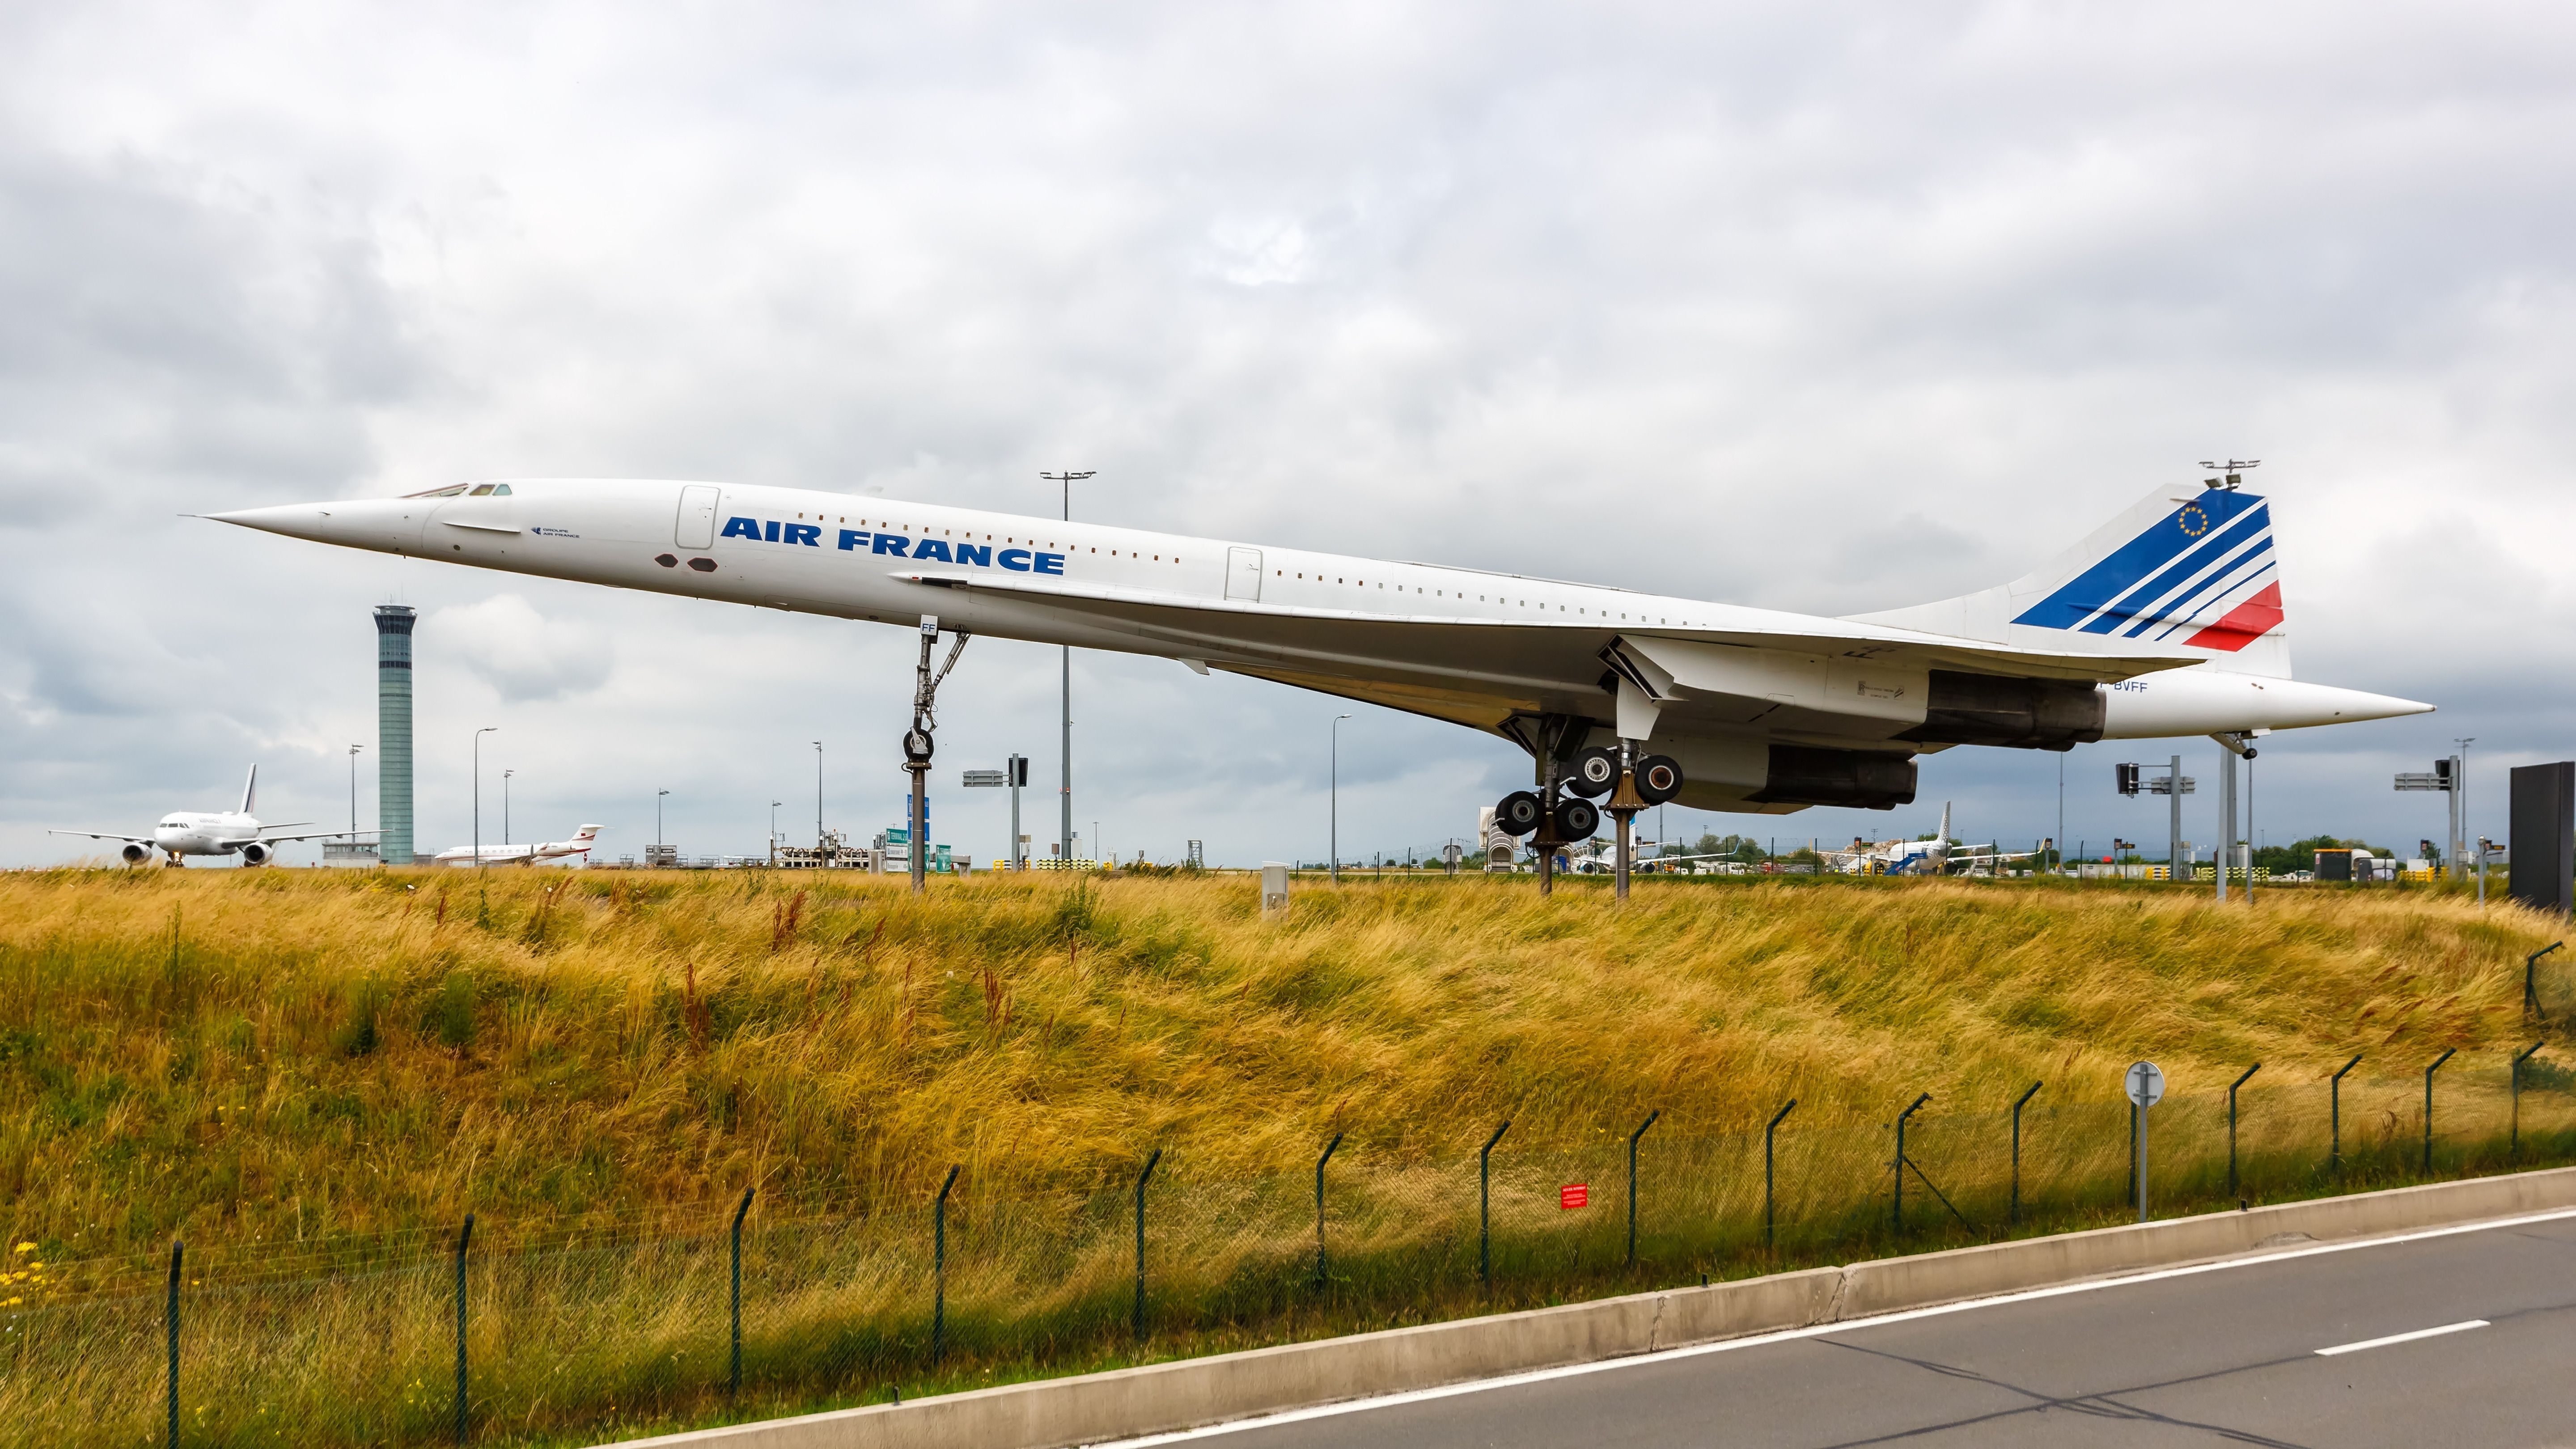 An Air France Concorde on display at Paris Charles de Gaulle Airport.